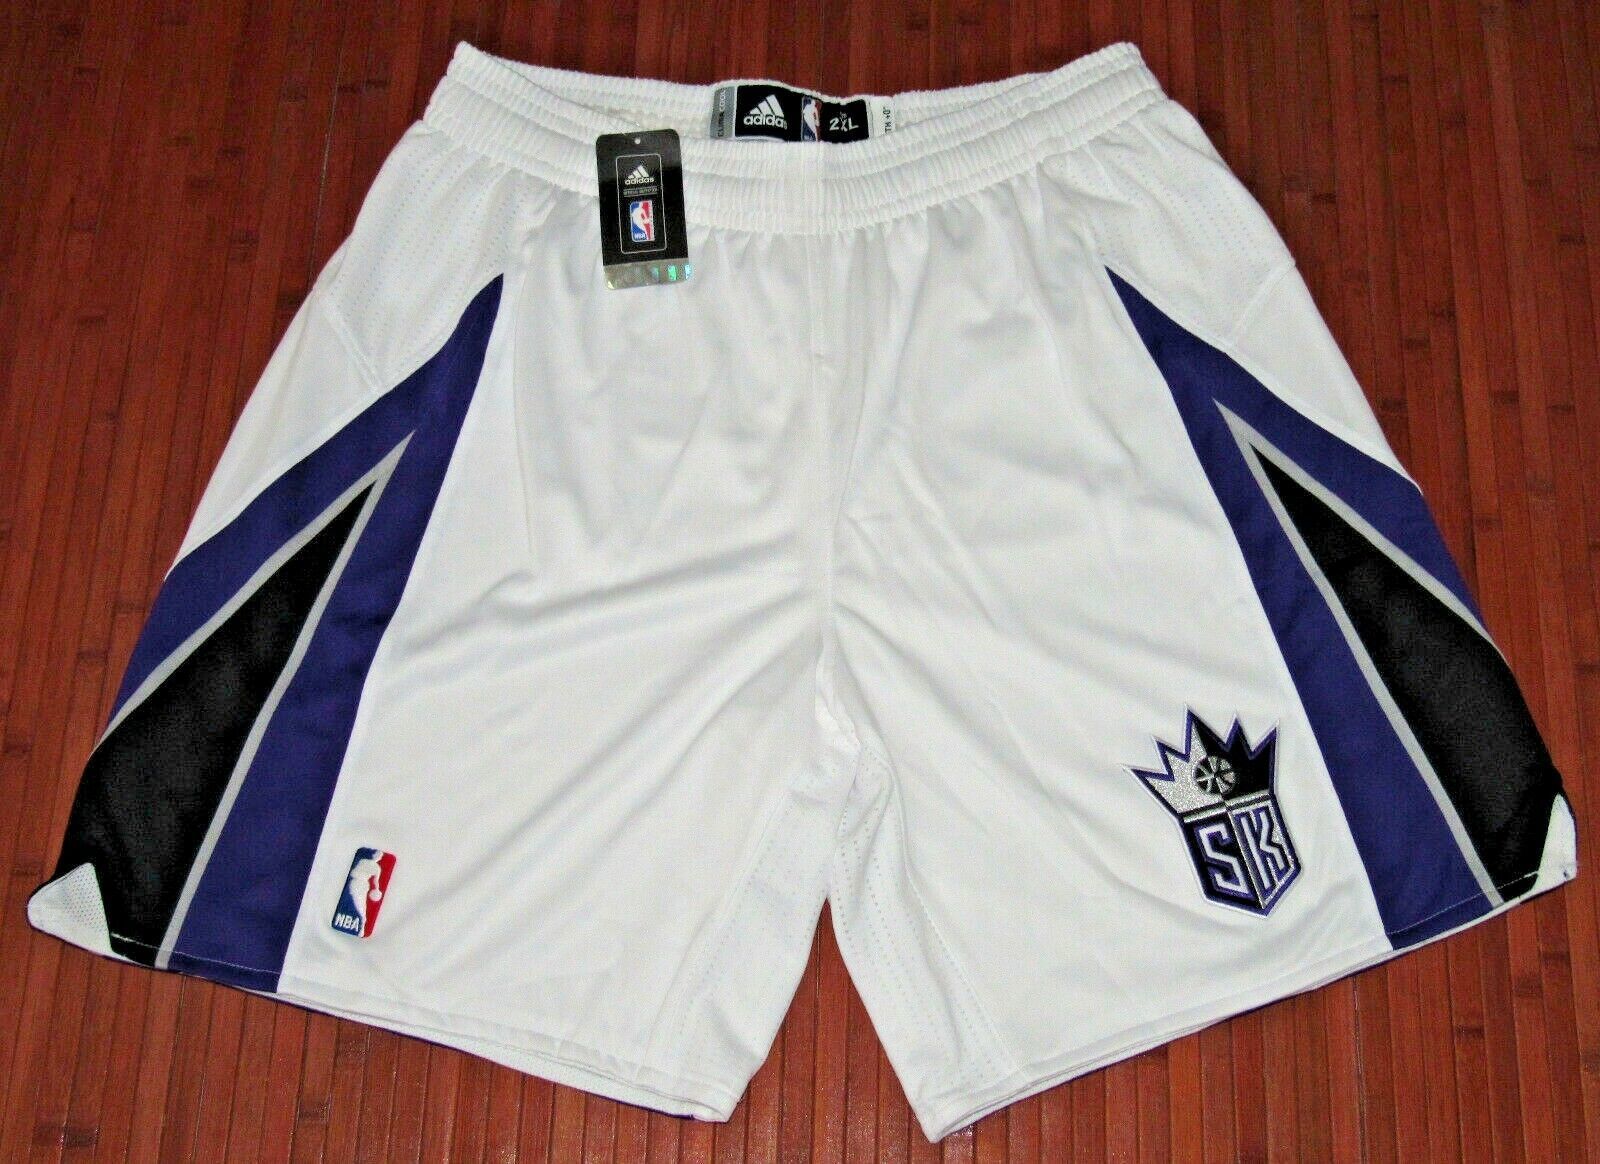 Primary image for NEW Adidas Authentic NBA Rev 30 Pro Cut Sacramento Kings Game Shorts White-2XL+0